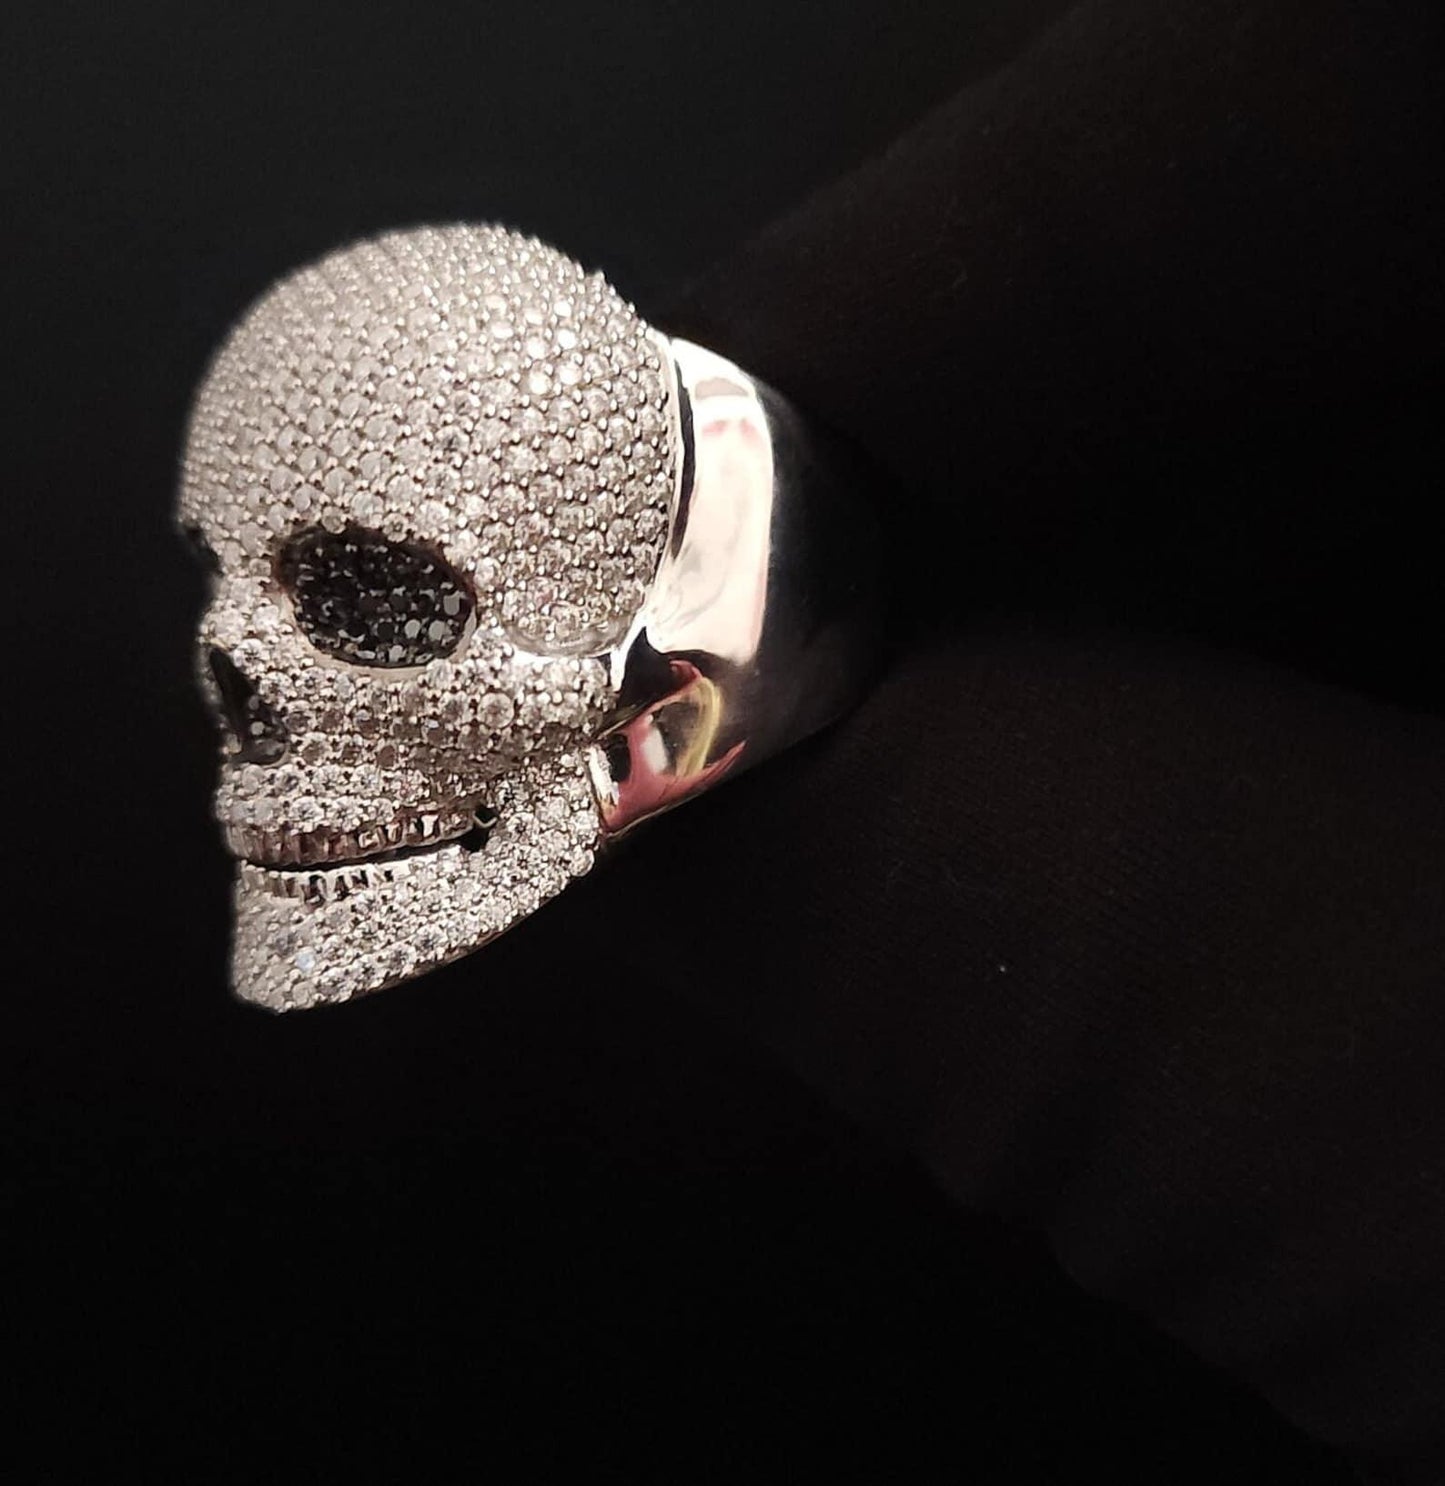 JBR JEWELER Iced Out Ring Skull  VVS Moissanite Iced Out Rapper Pinky Hip Hop Ring Men's S925 Silver Ring